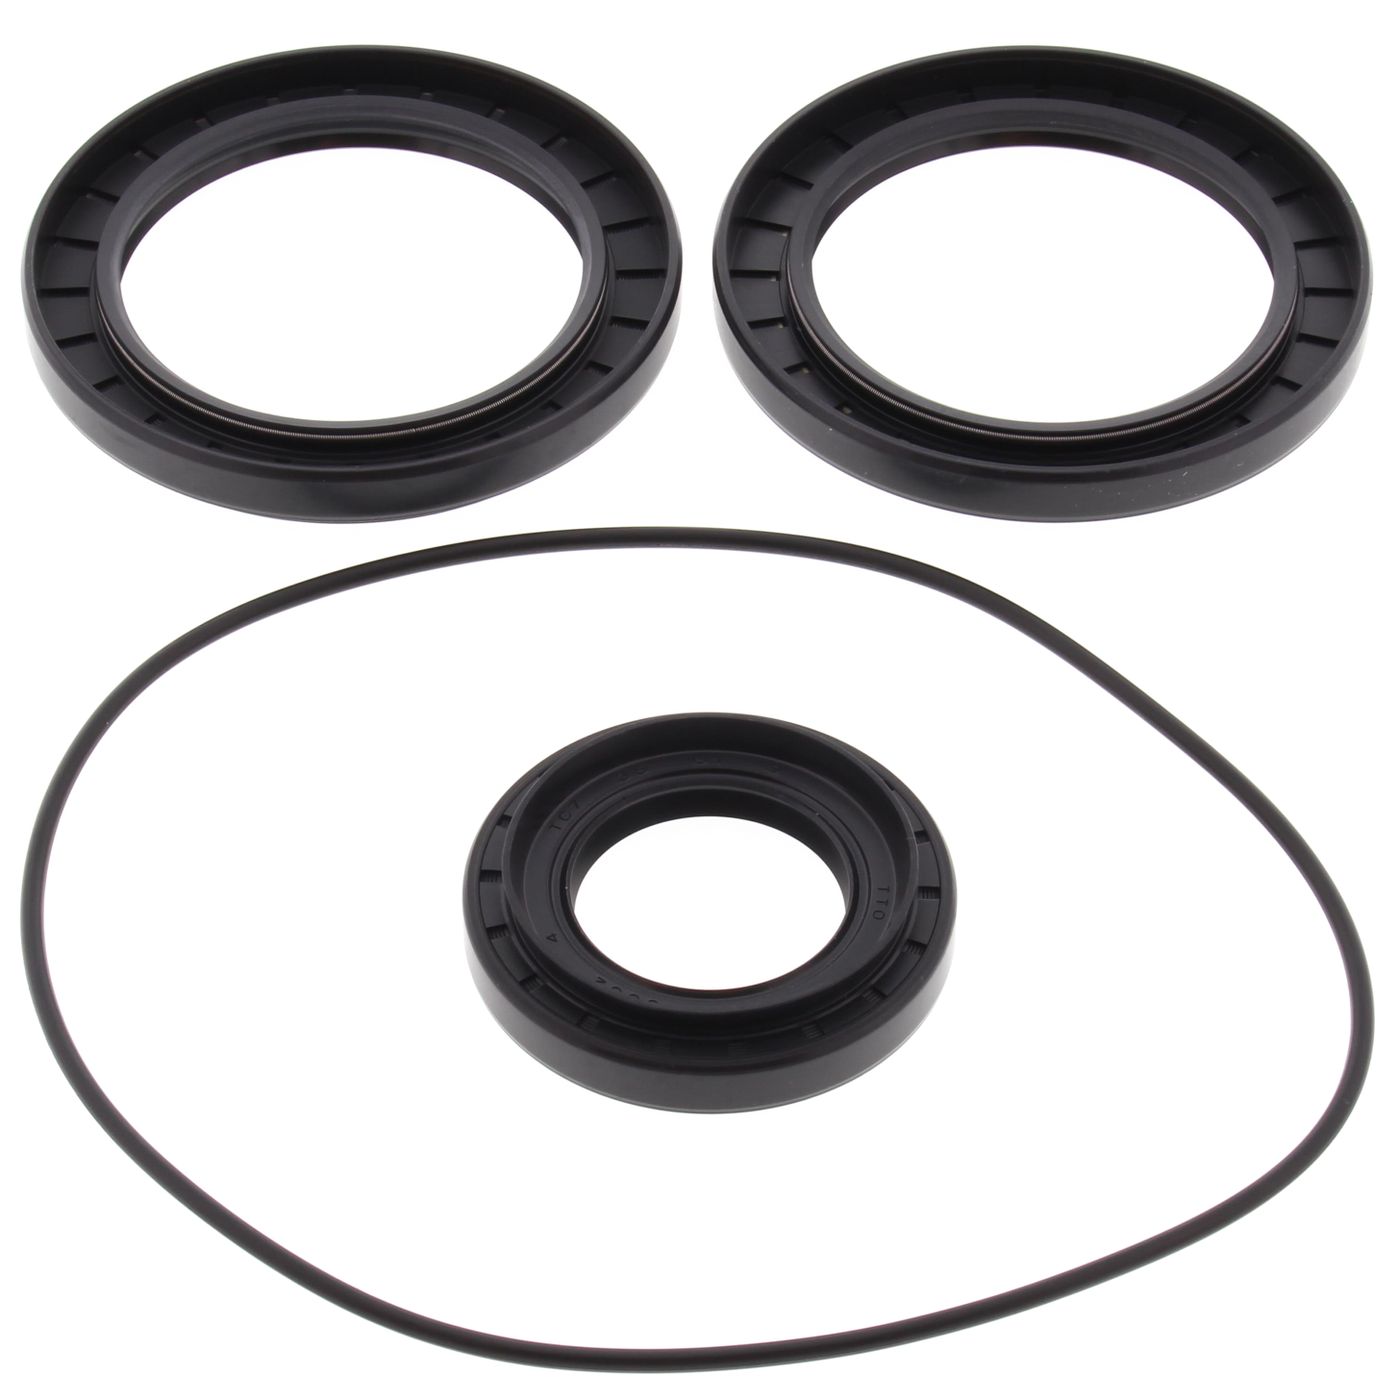 Wrp Diff Seal Kits - WRP252045-5 image